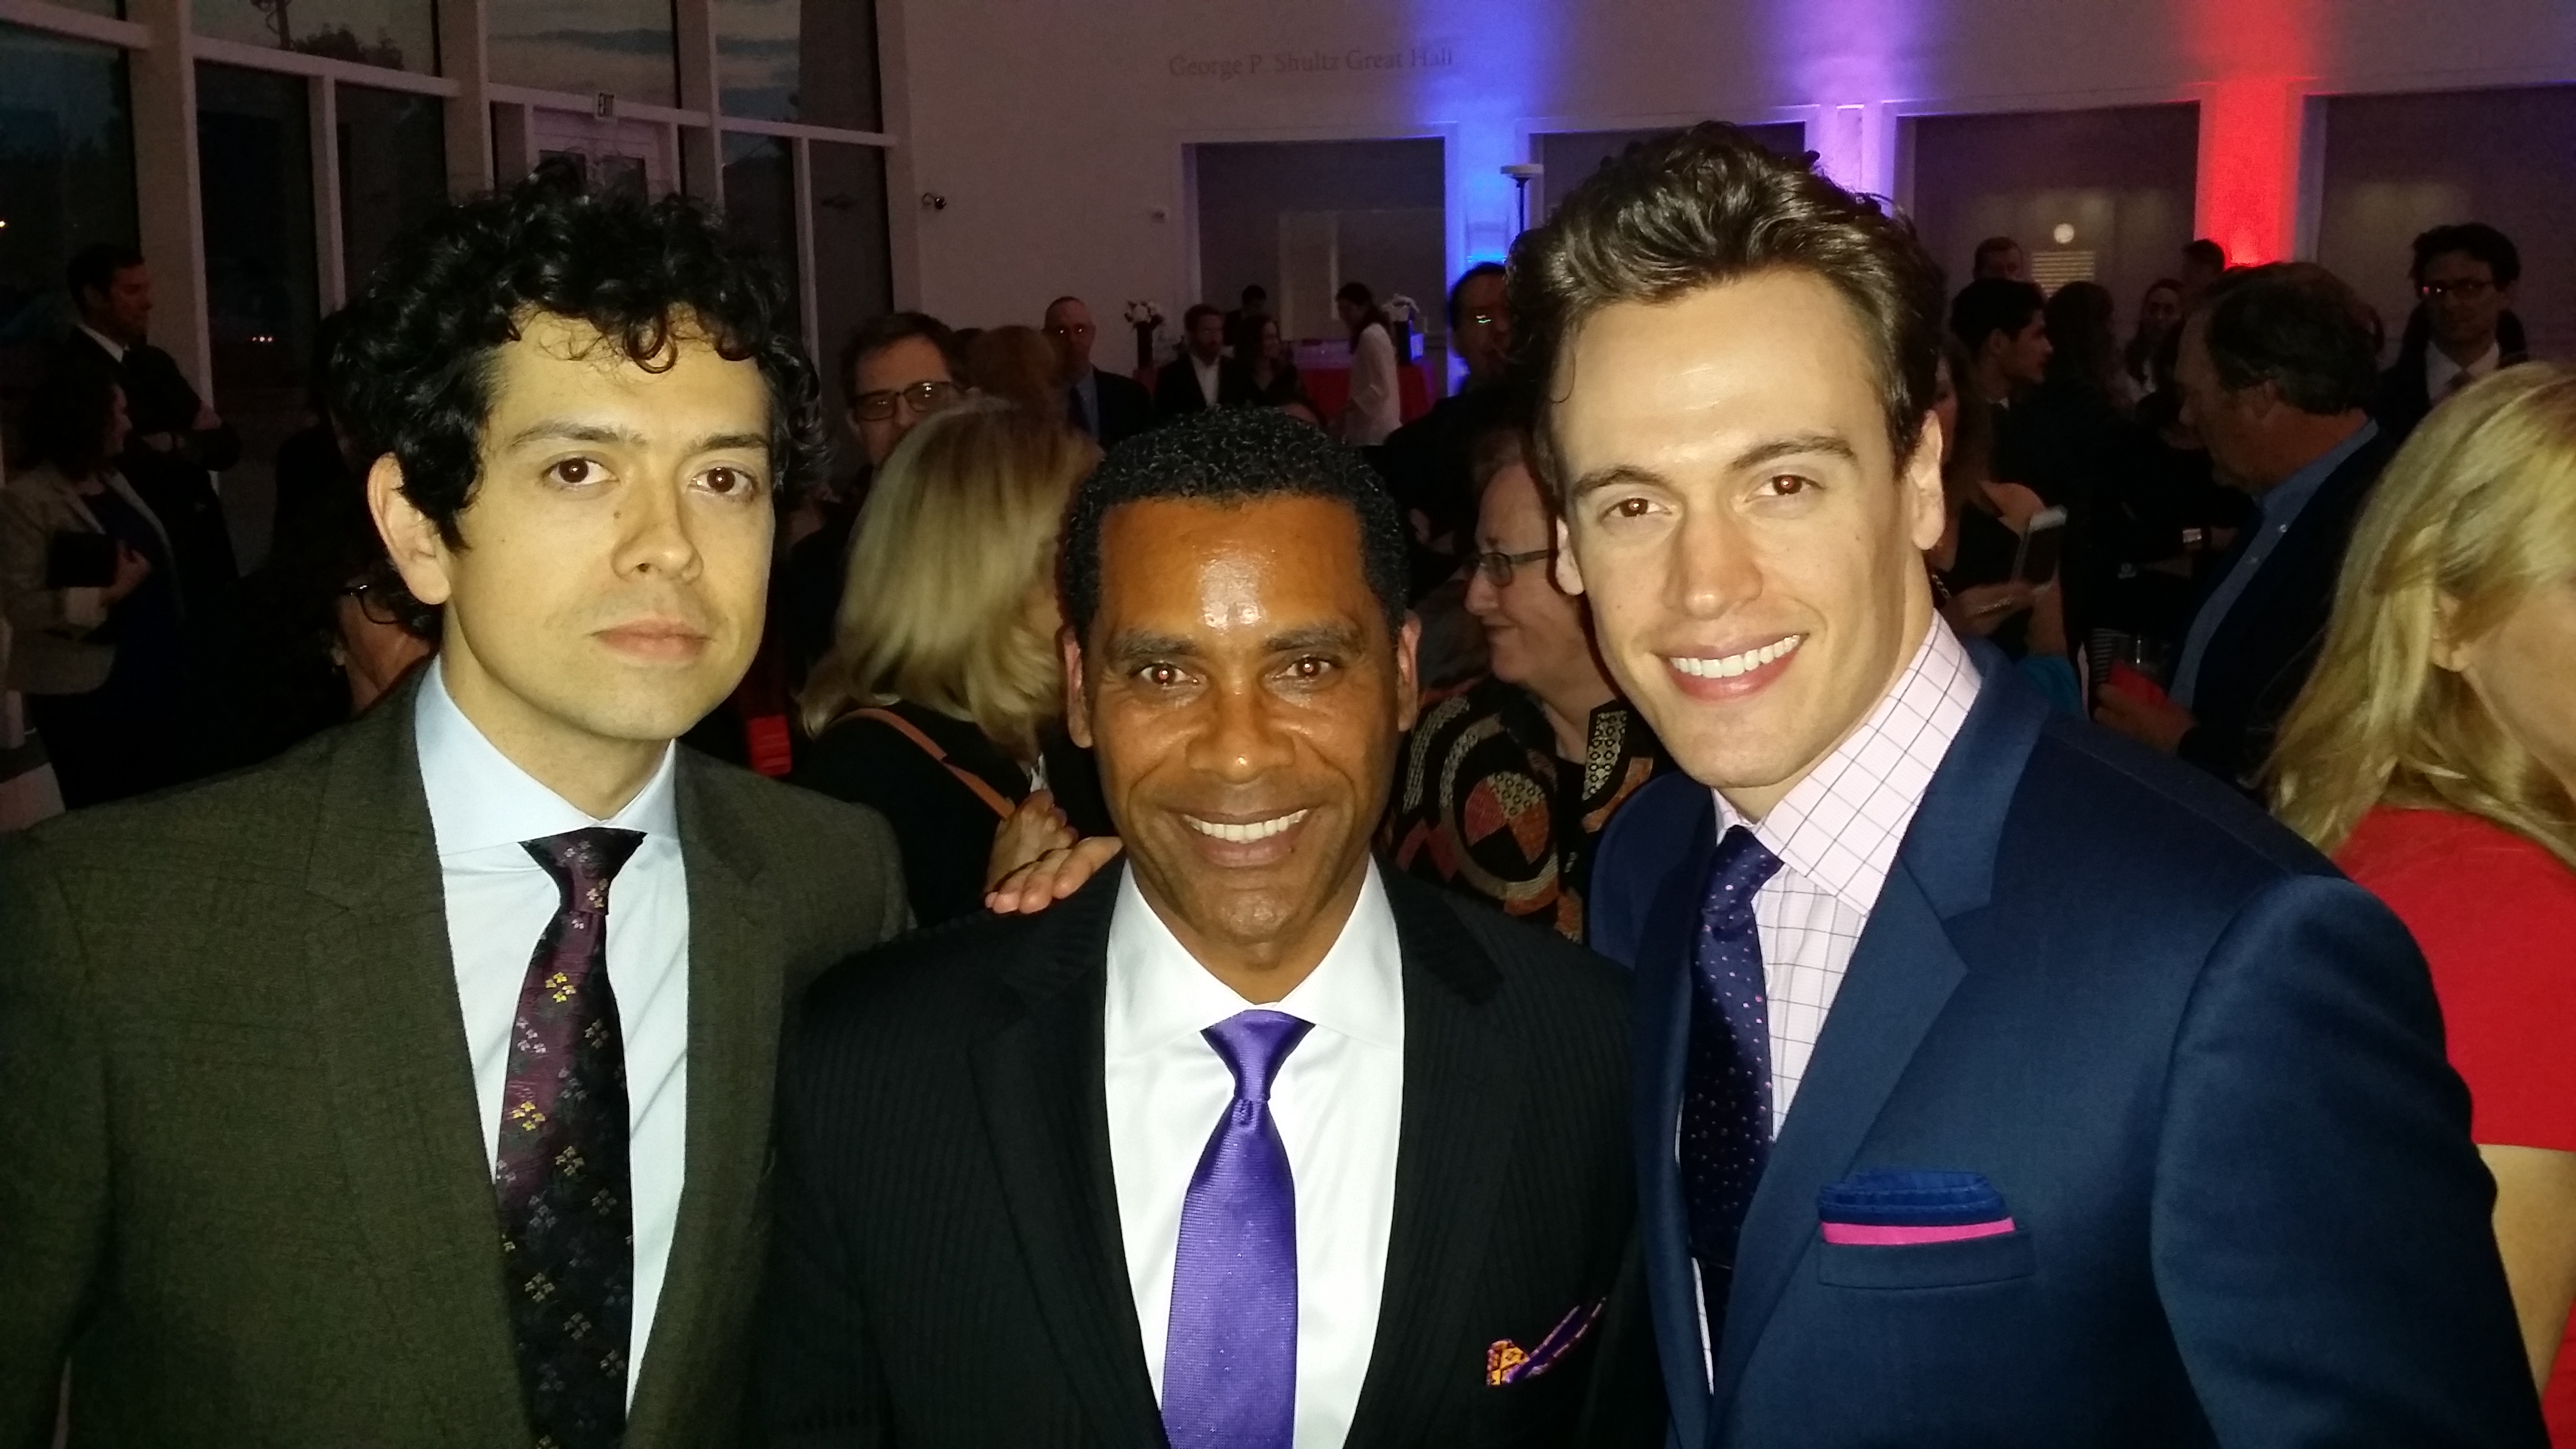 Actor Lamont Easter with Actors Geoffrey Arend and Erich Bergen at the CBS Washington DC screening of Madam Secretary